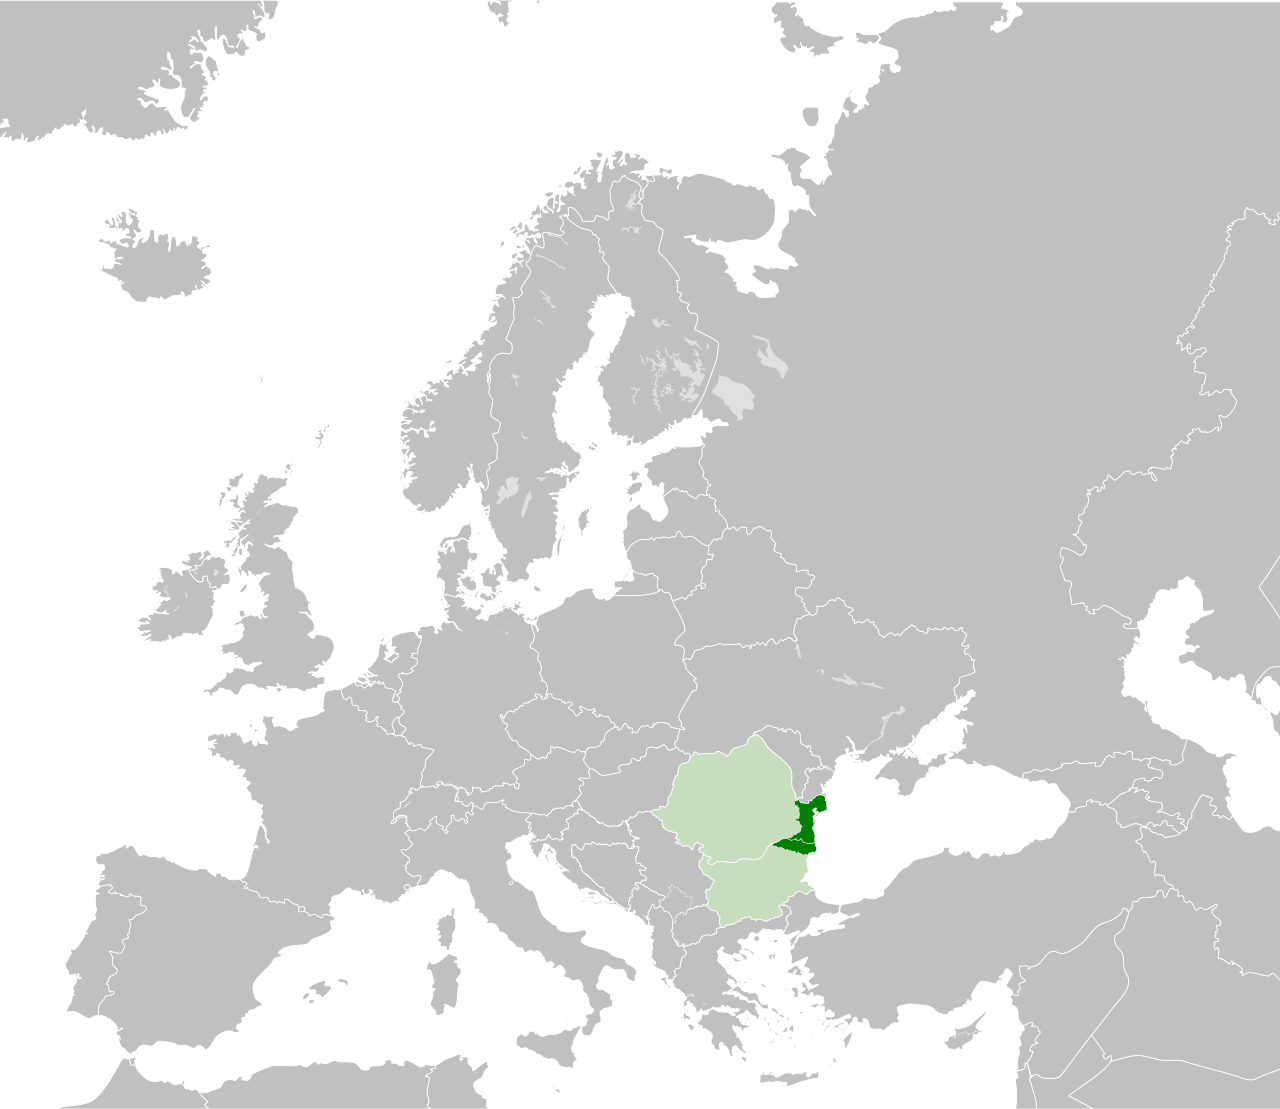 Dobruja_in_Europe_map.svg (1).png